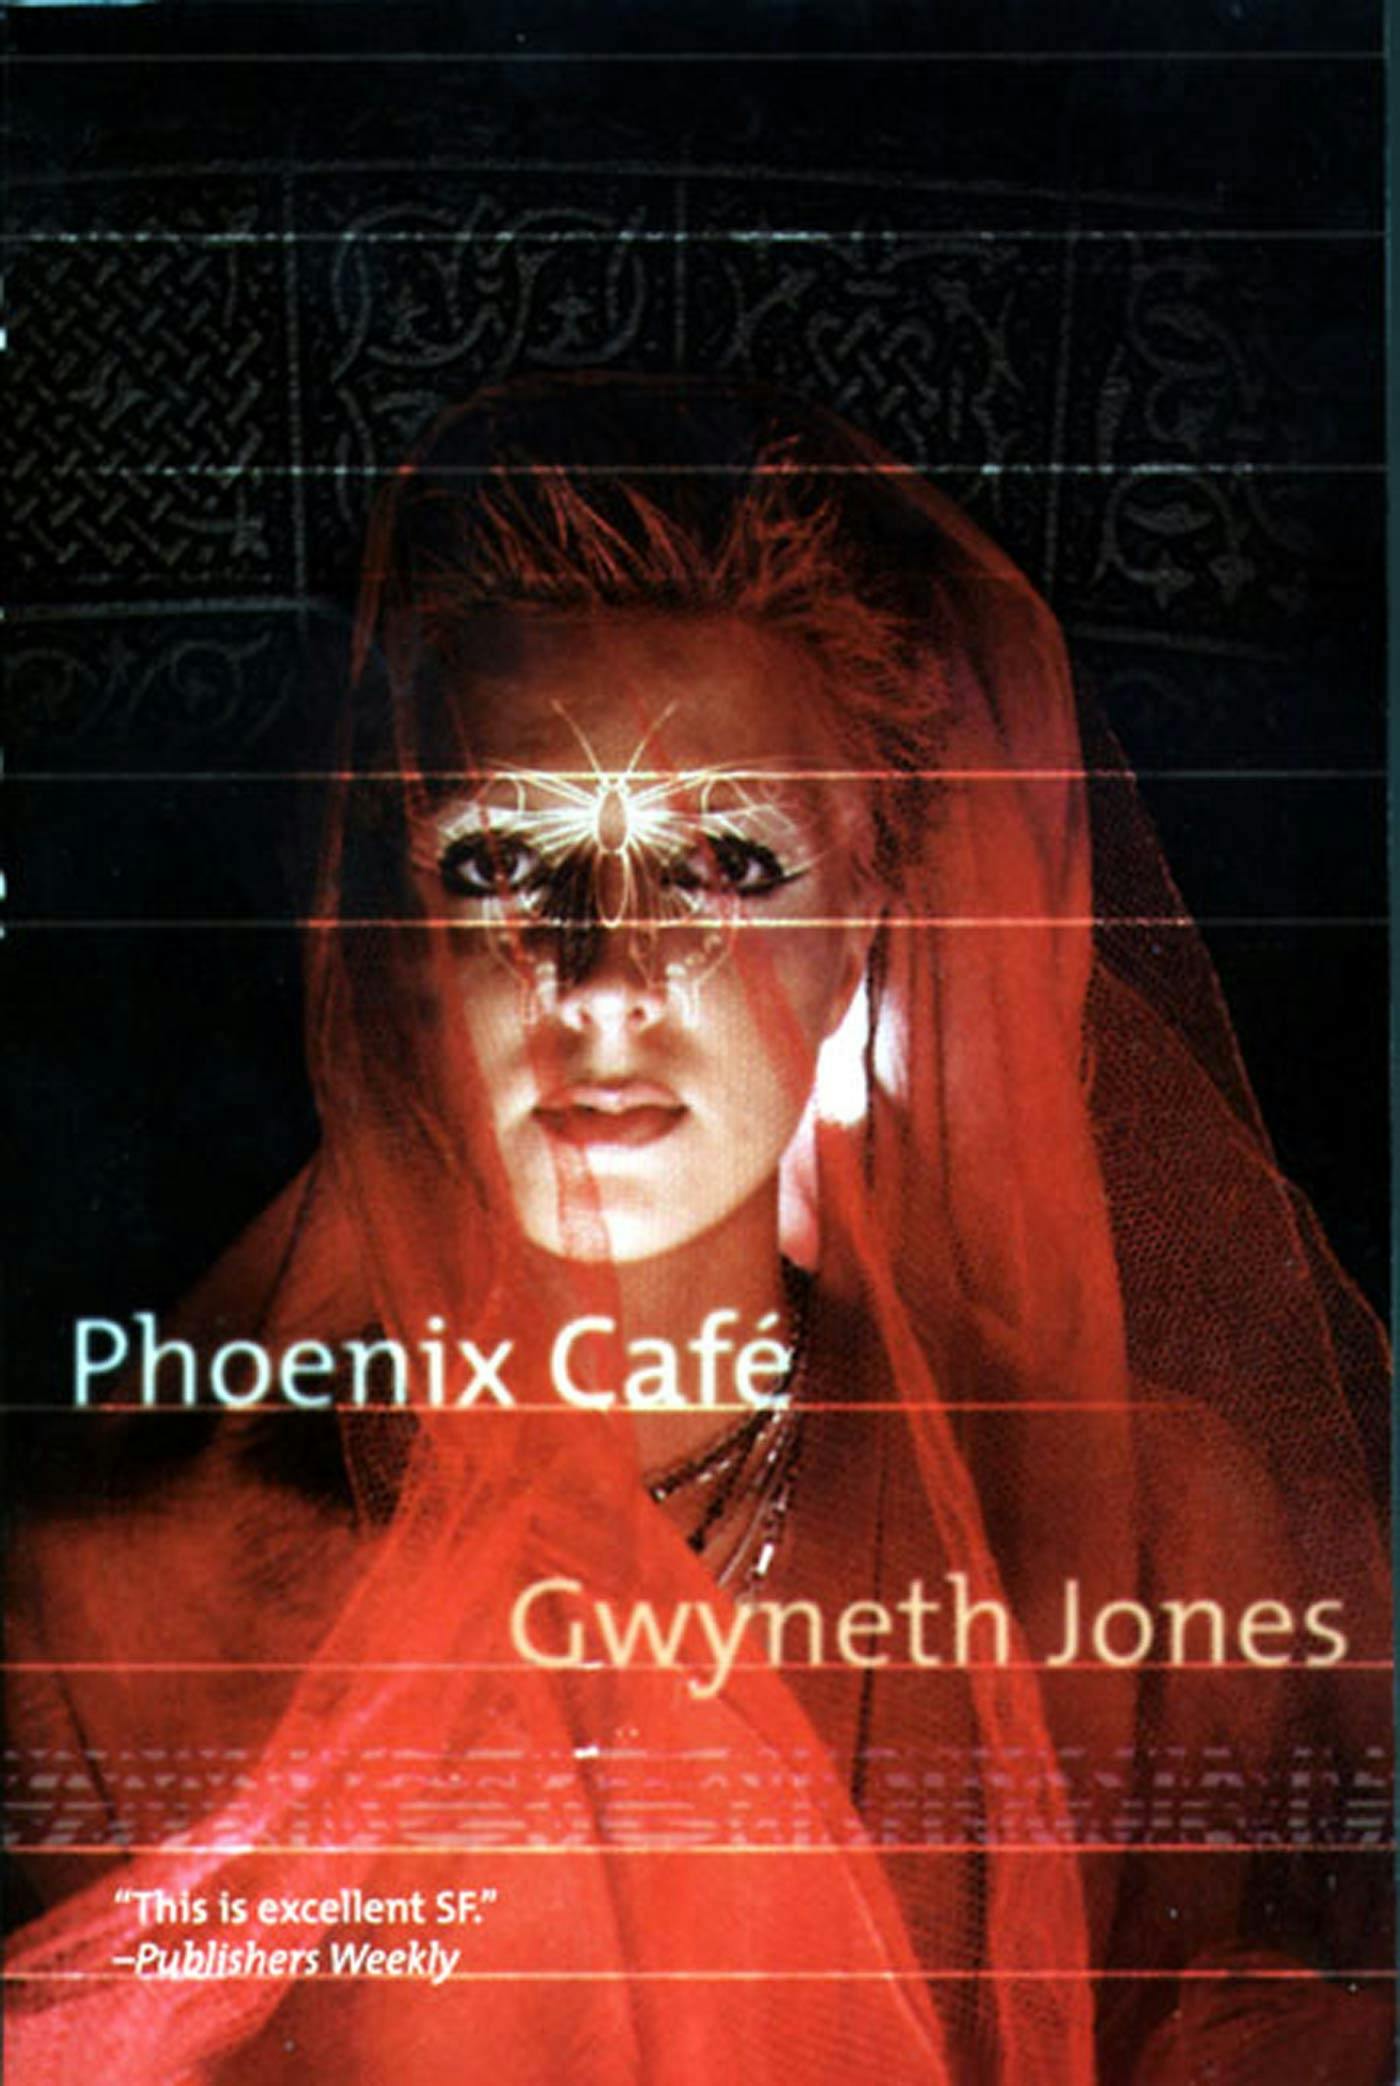 Cover for the book titled as: Phoenix Café